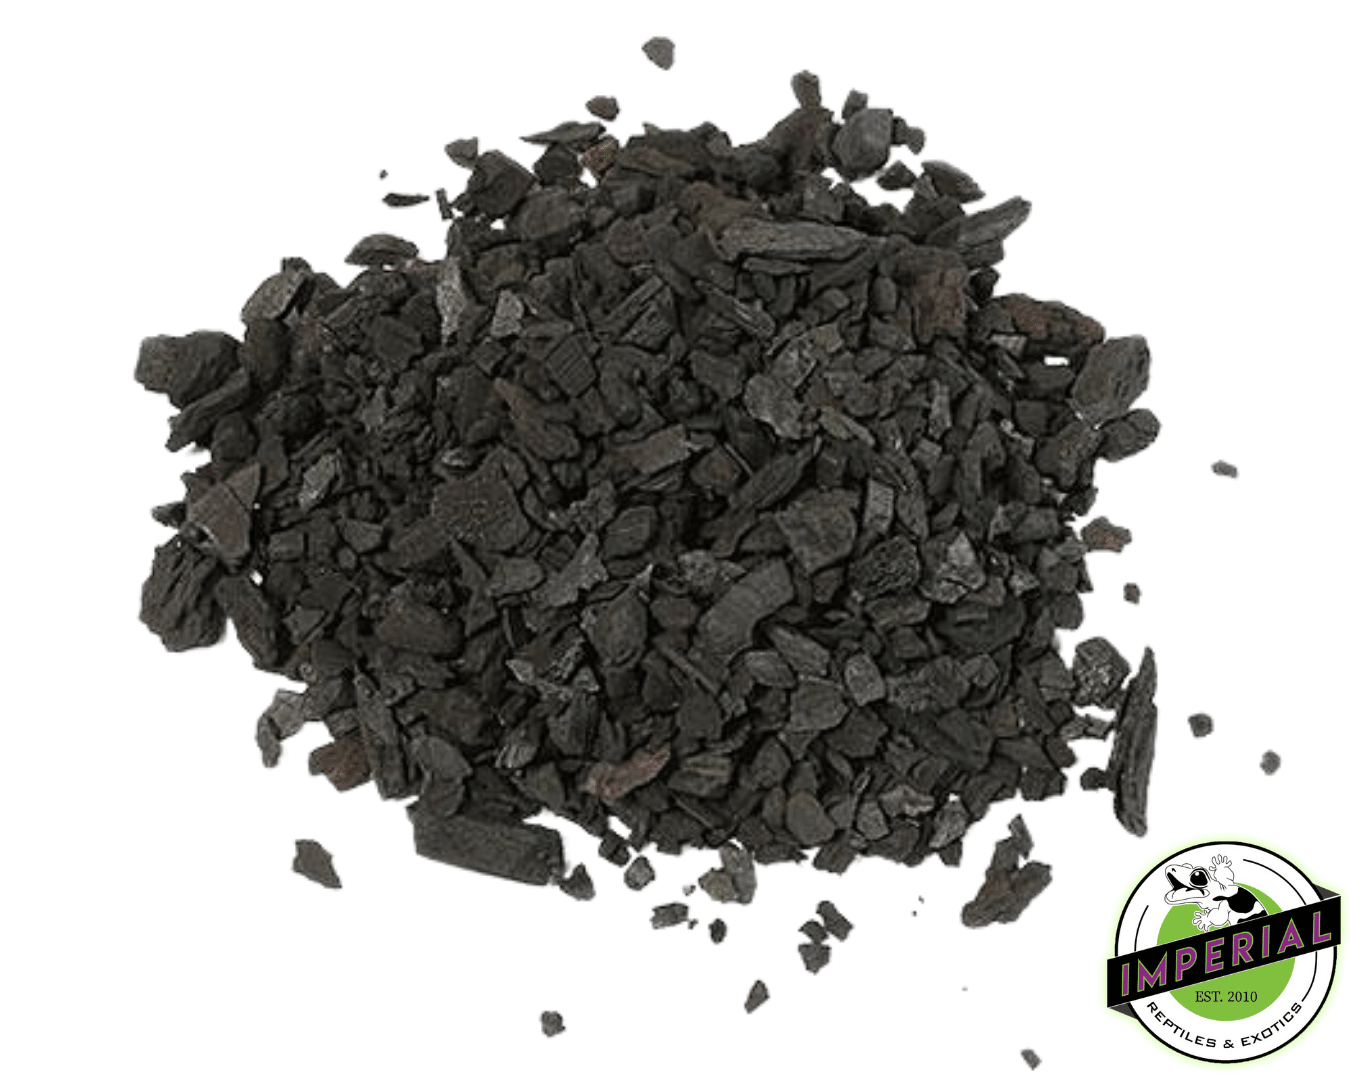 Horticulture charcoal for sale online at cheap prices. Bio active charcoal is important for vivariums and reptile enclosures.